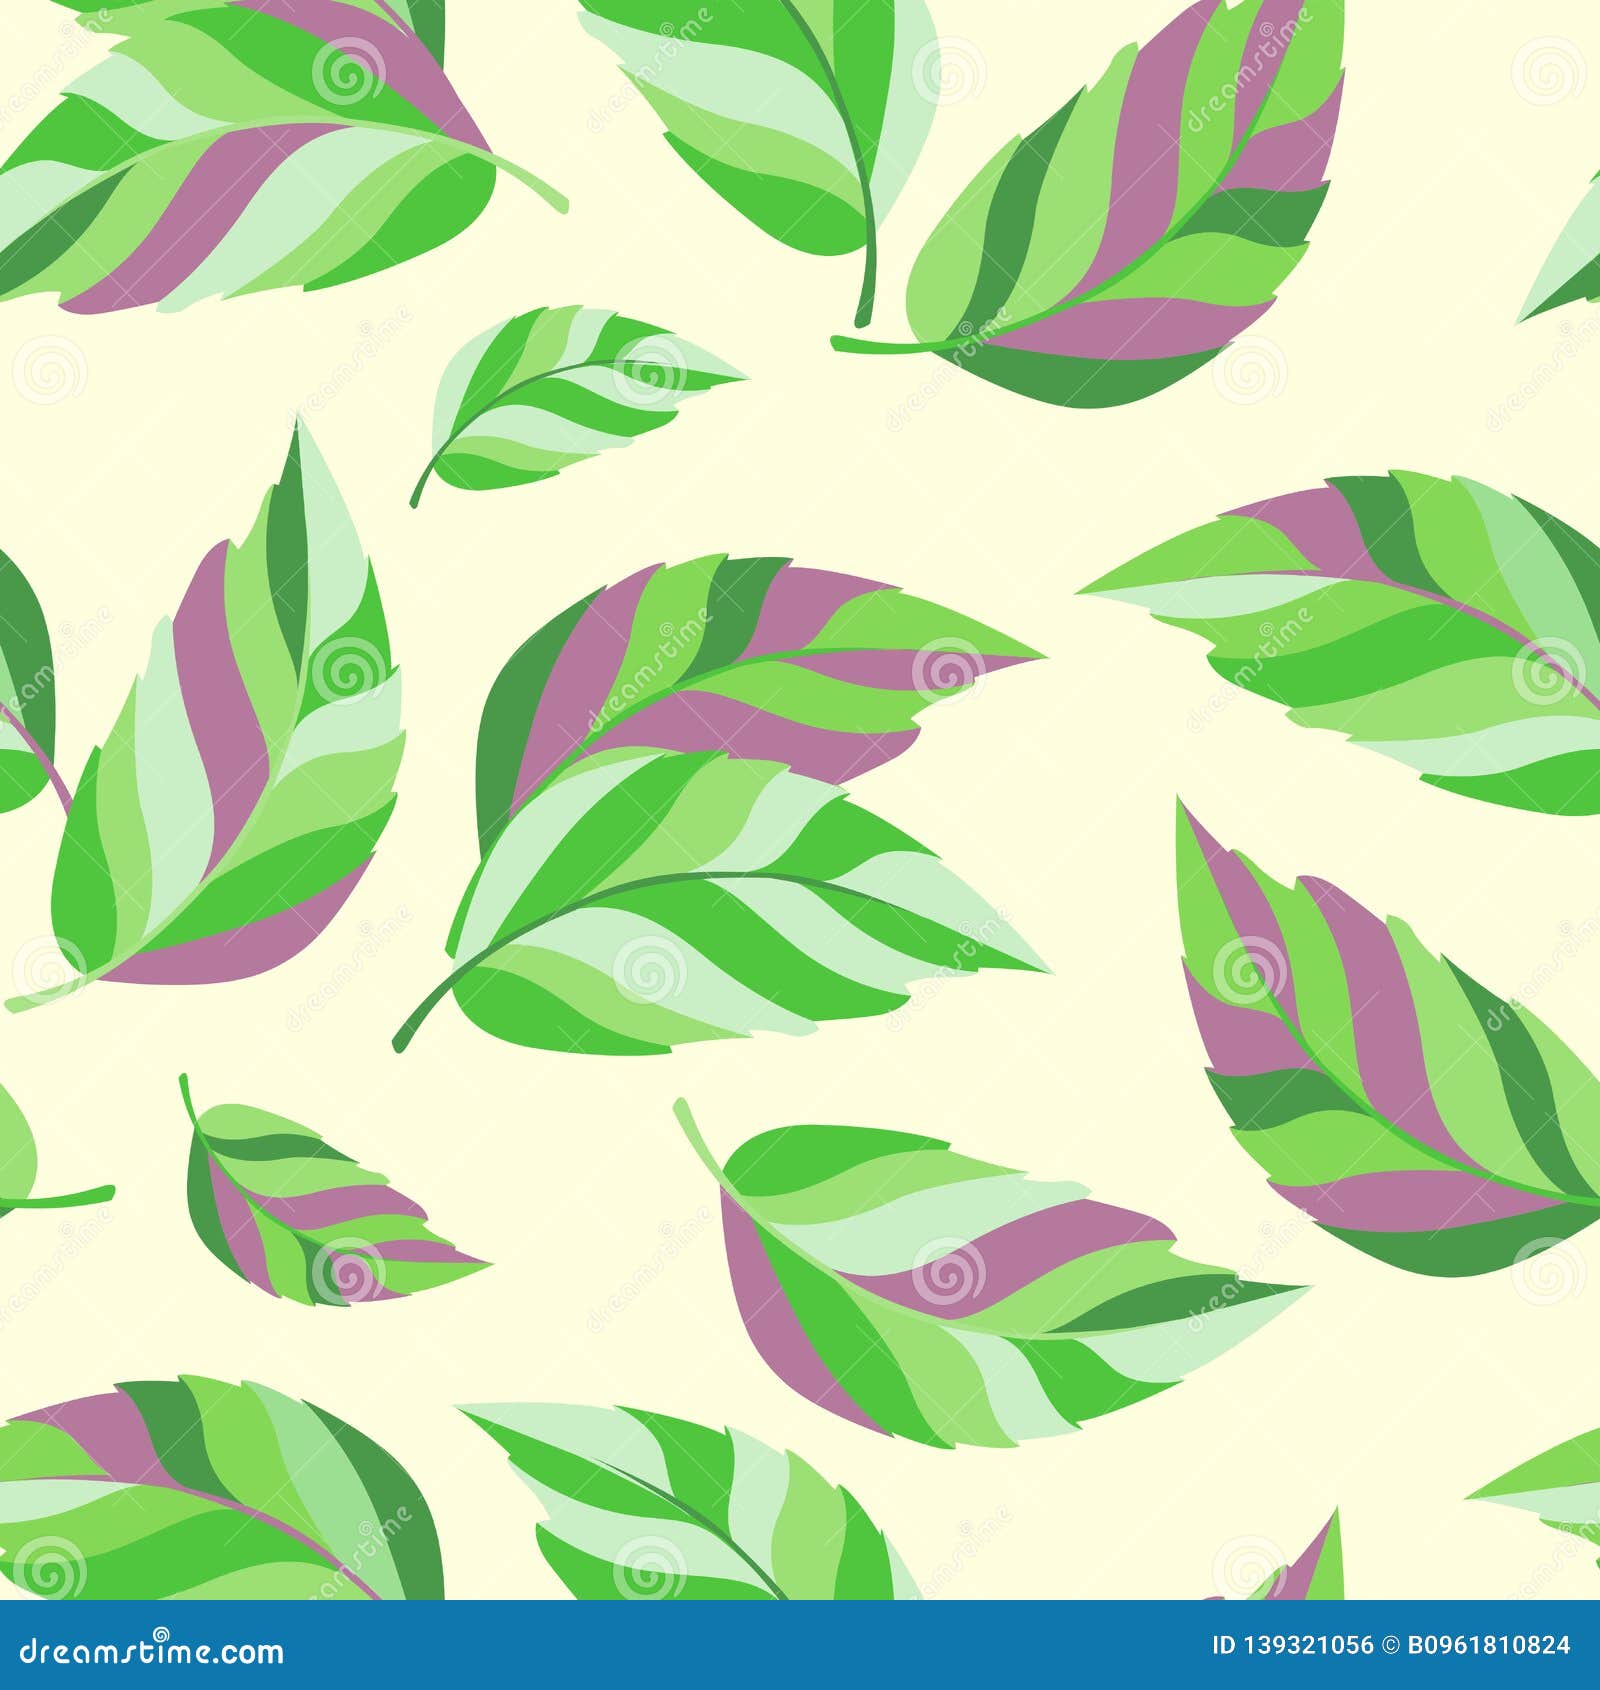 Color Foliage Seamless Pattern. Geometric Leaves Endless Repeatable